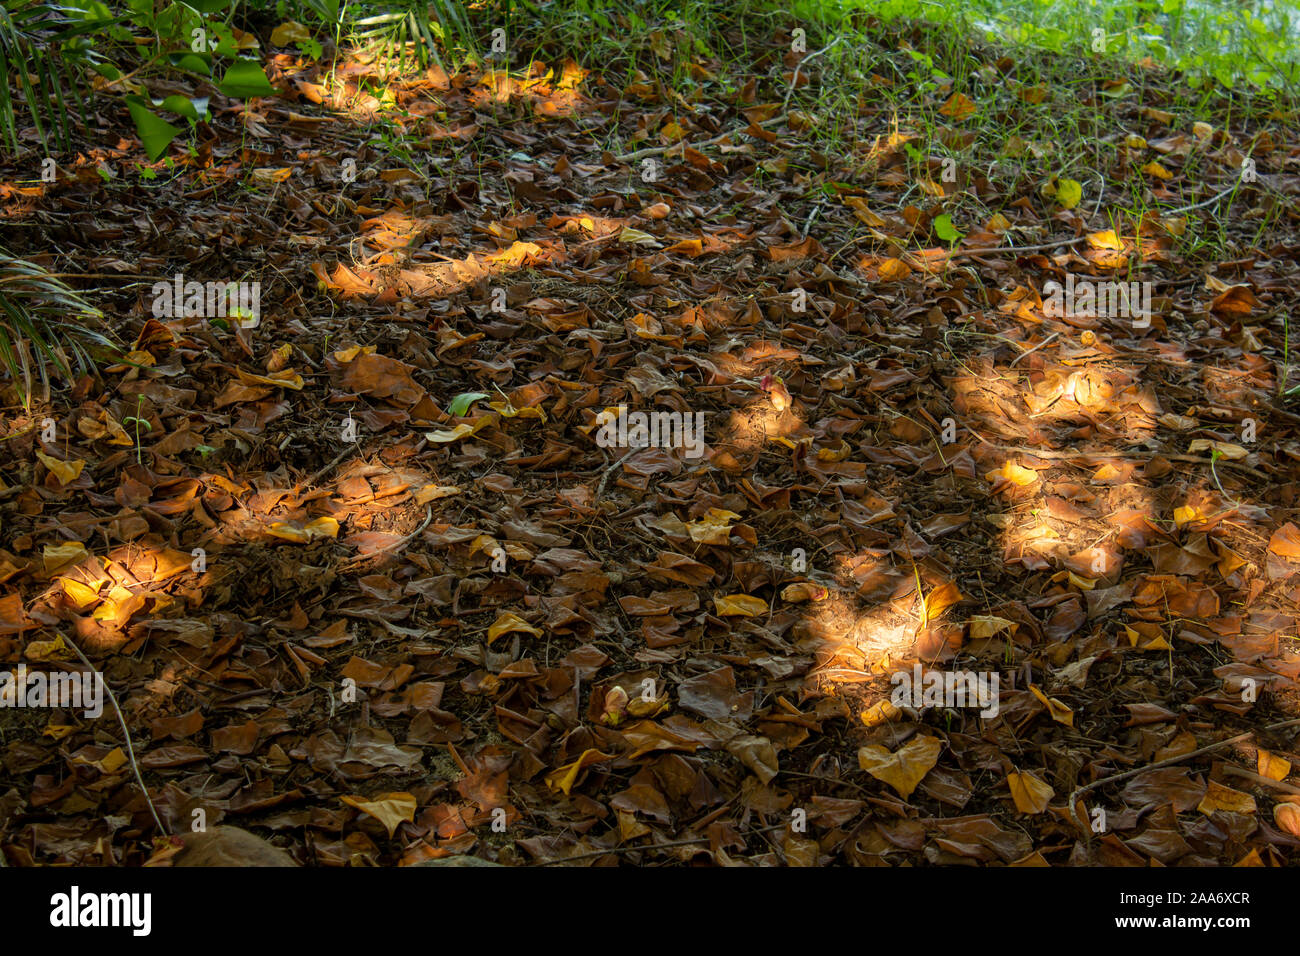 Colourful fallen leaves on brown forest soil background Stock Photo